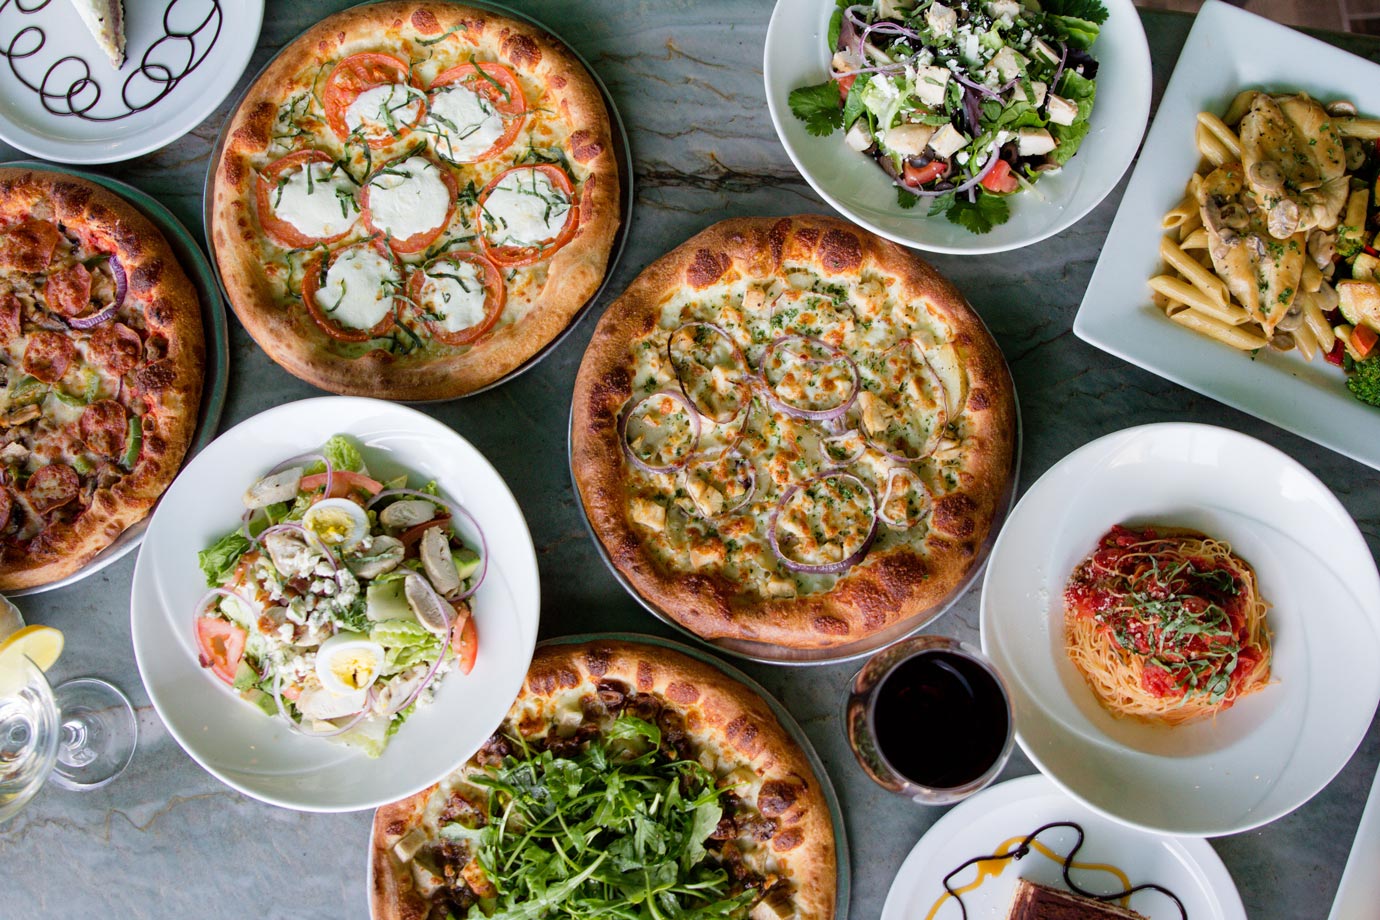 Different types of pizza and salads on the table